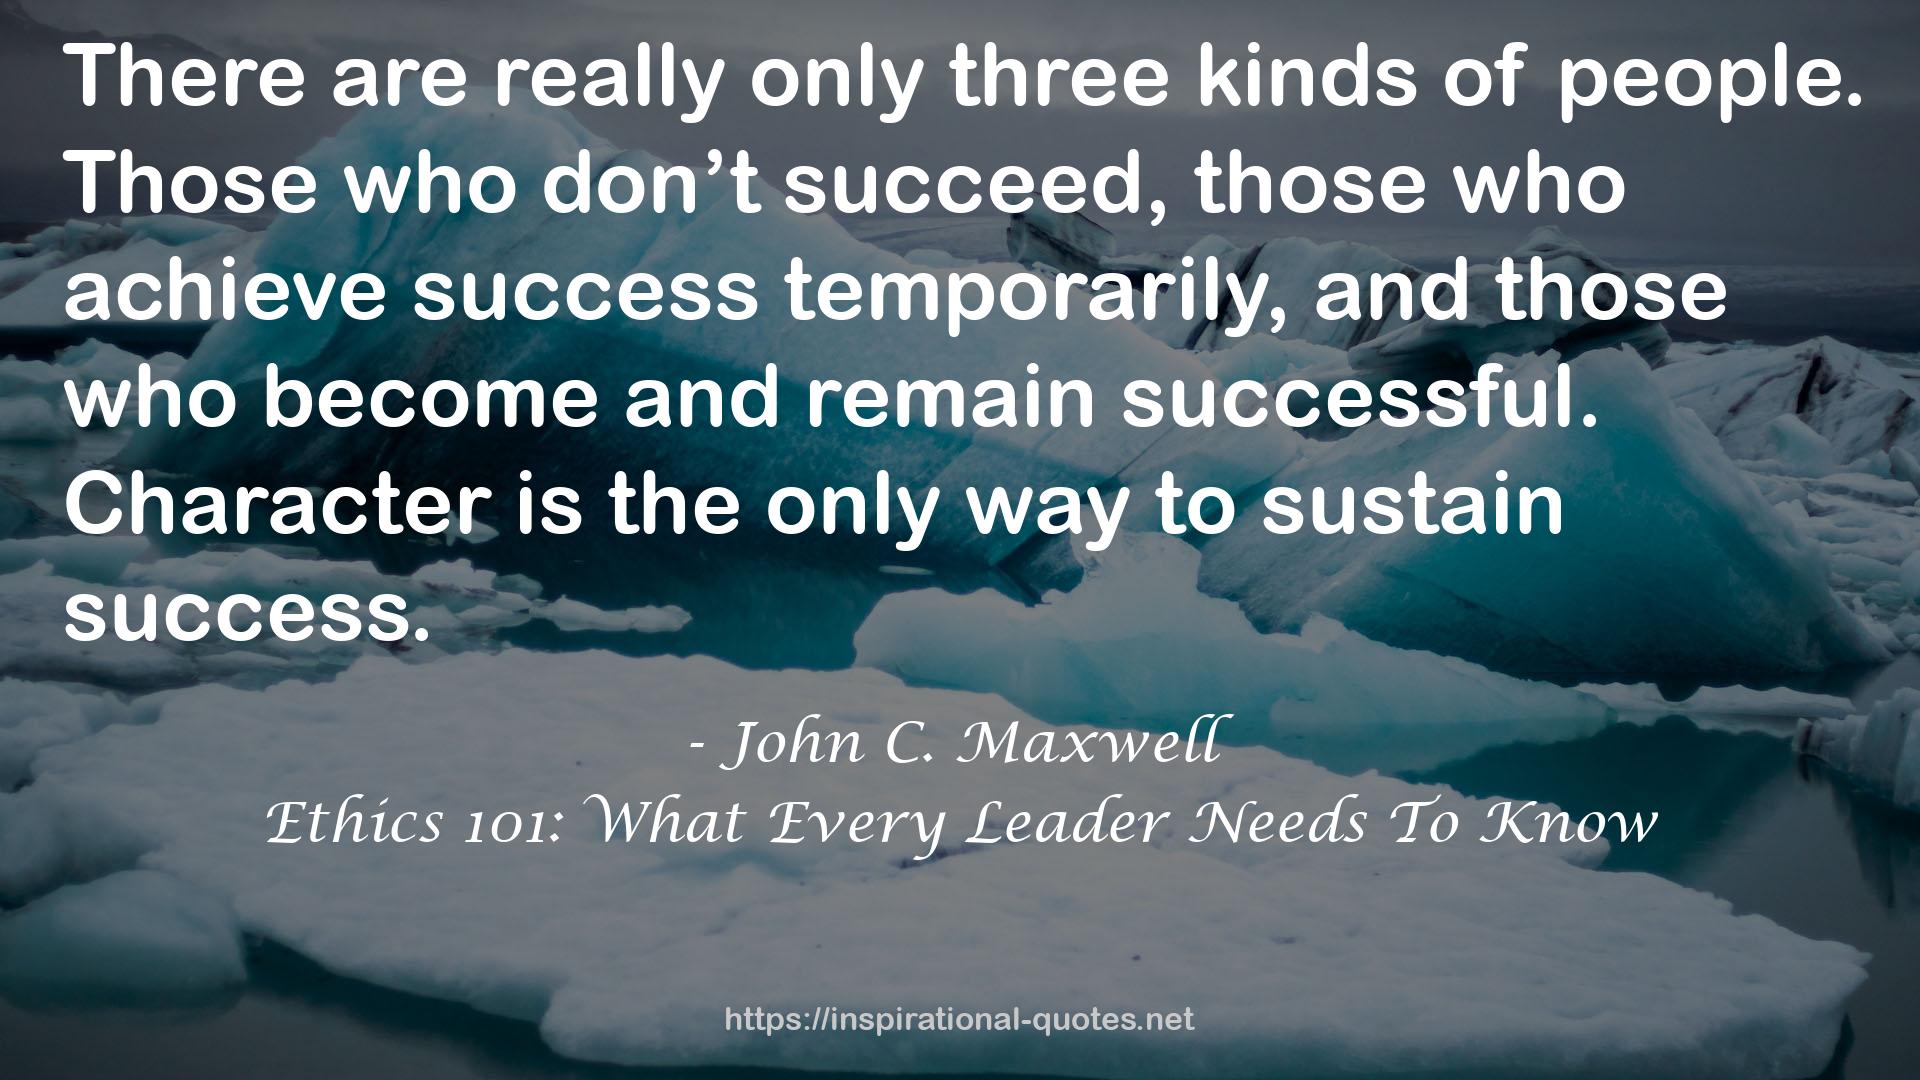 Ethics 101: What Every Leader Needs To Know QUOTES